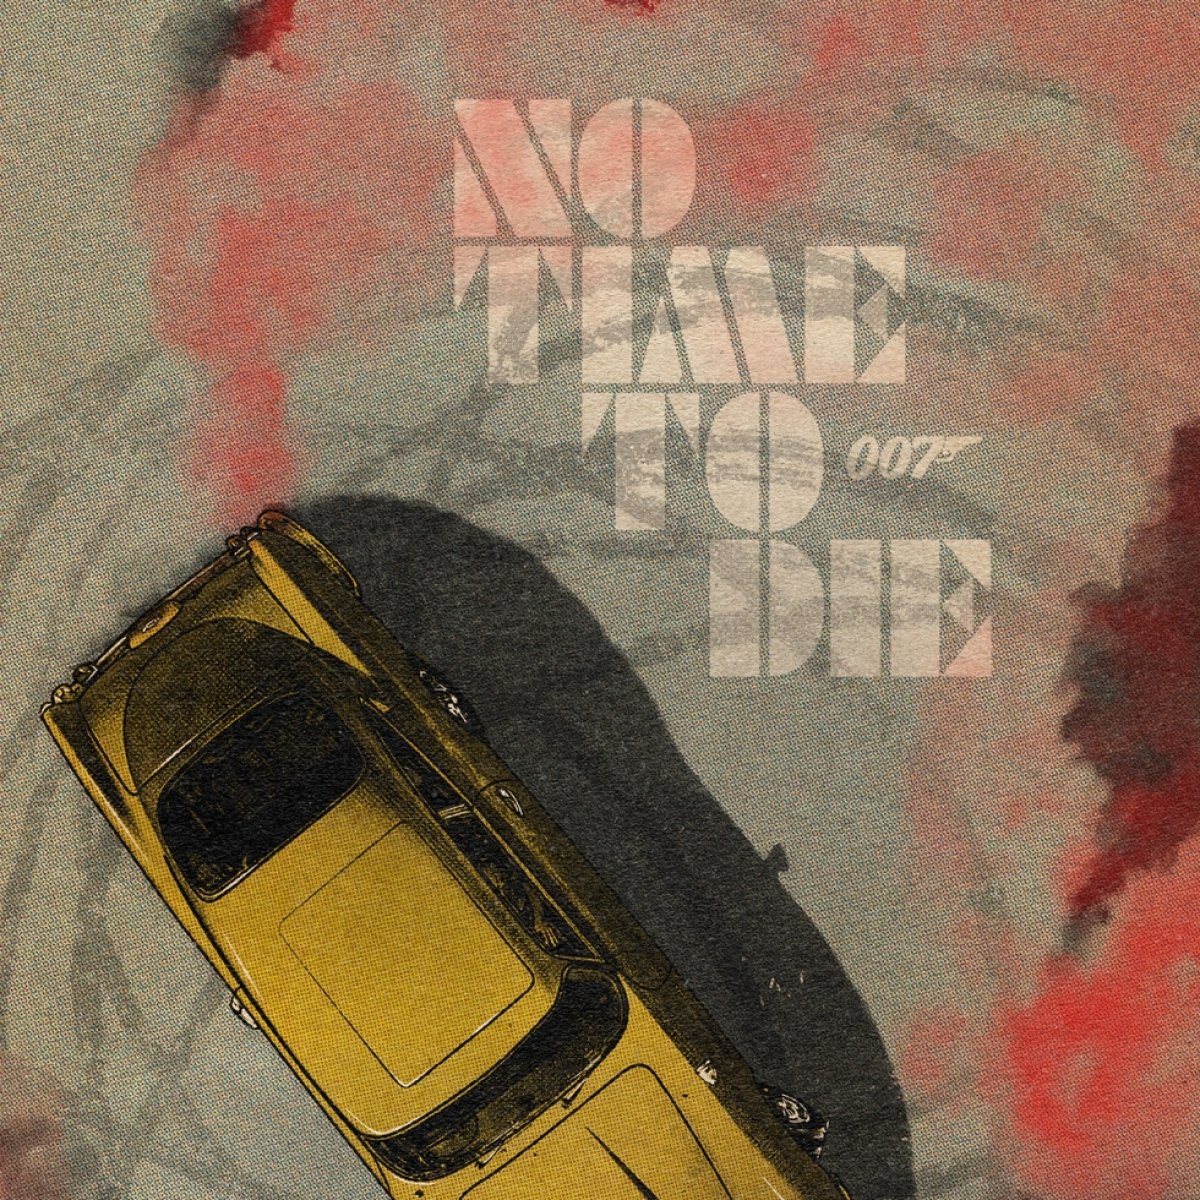 James Bond 007 No Time To Die Movie Poster Illustrations in Retro Comic Style